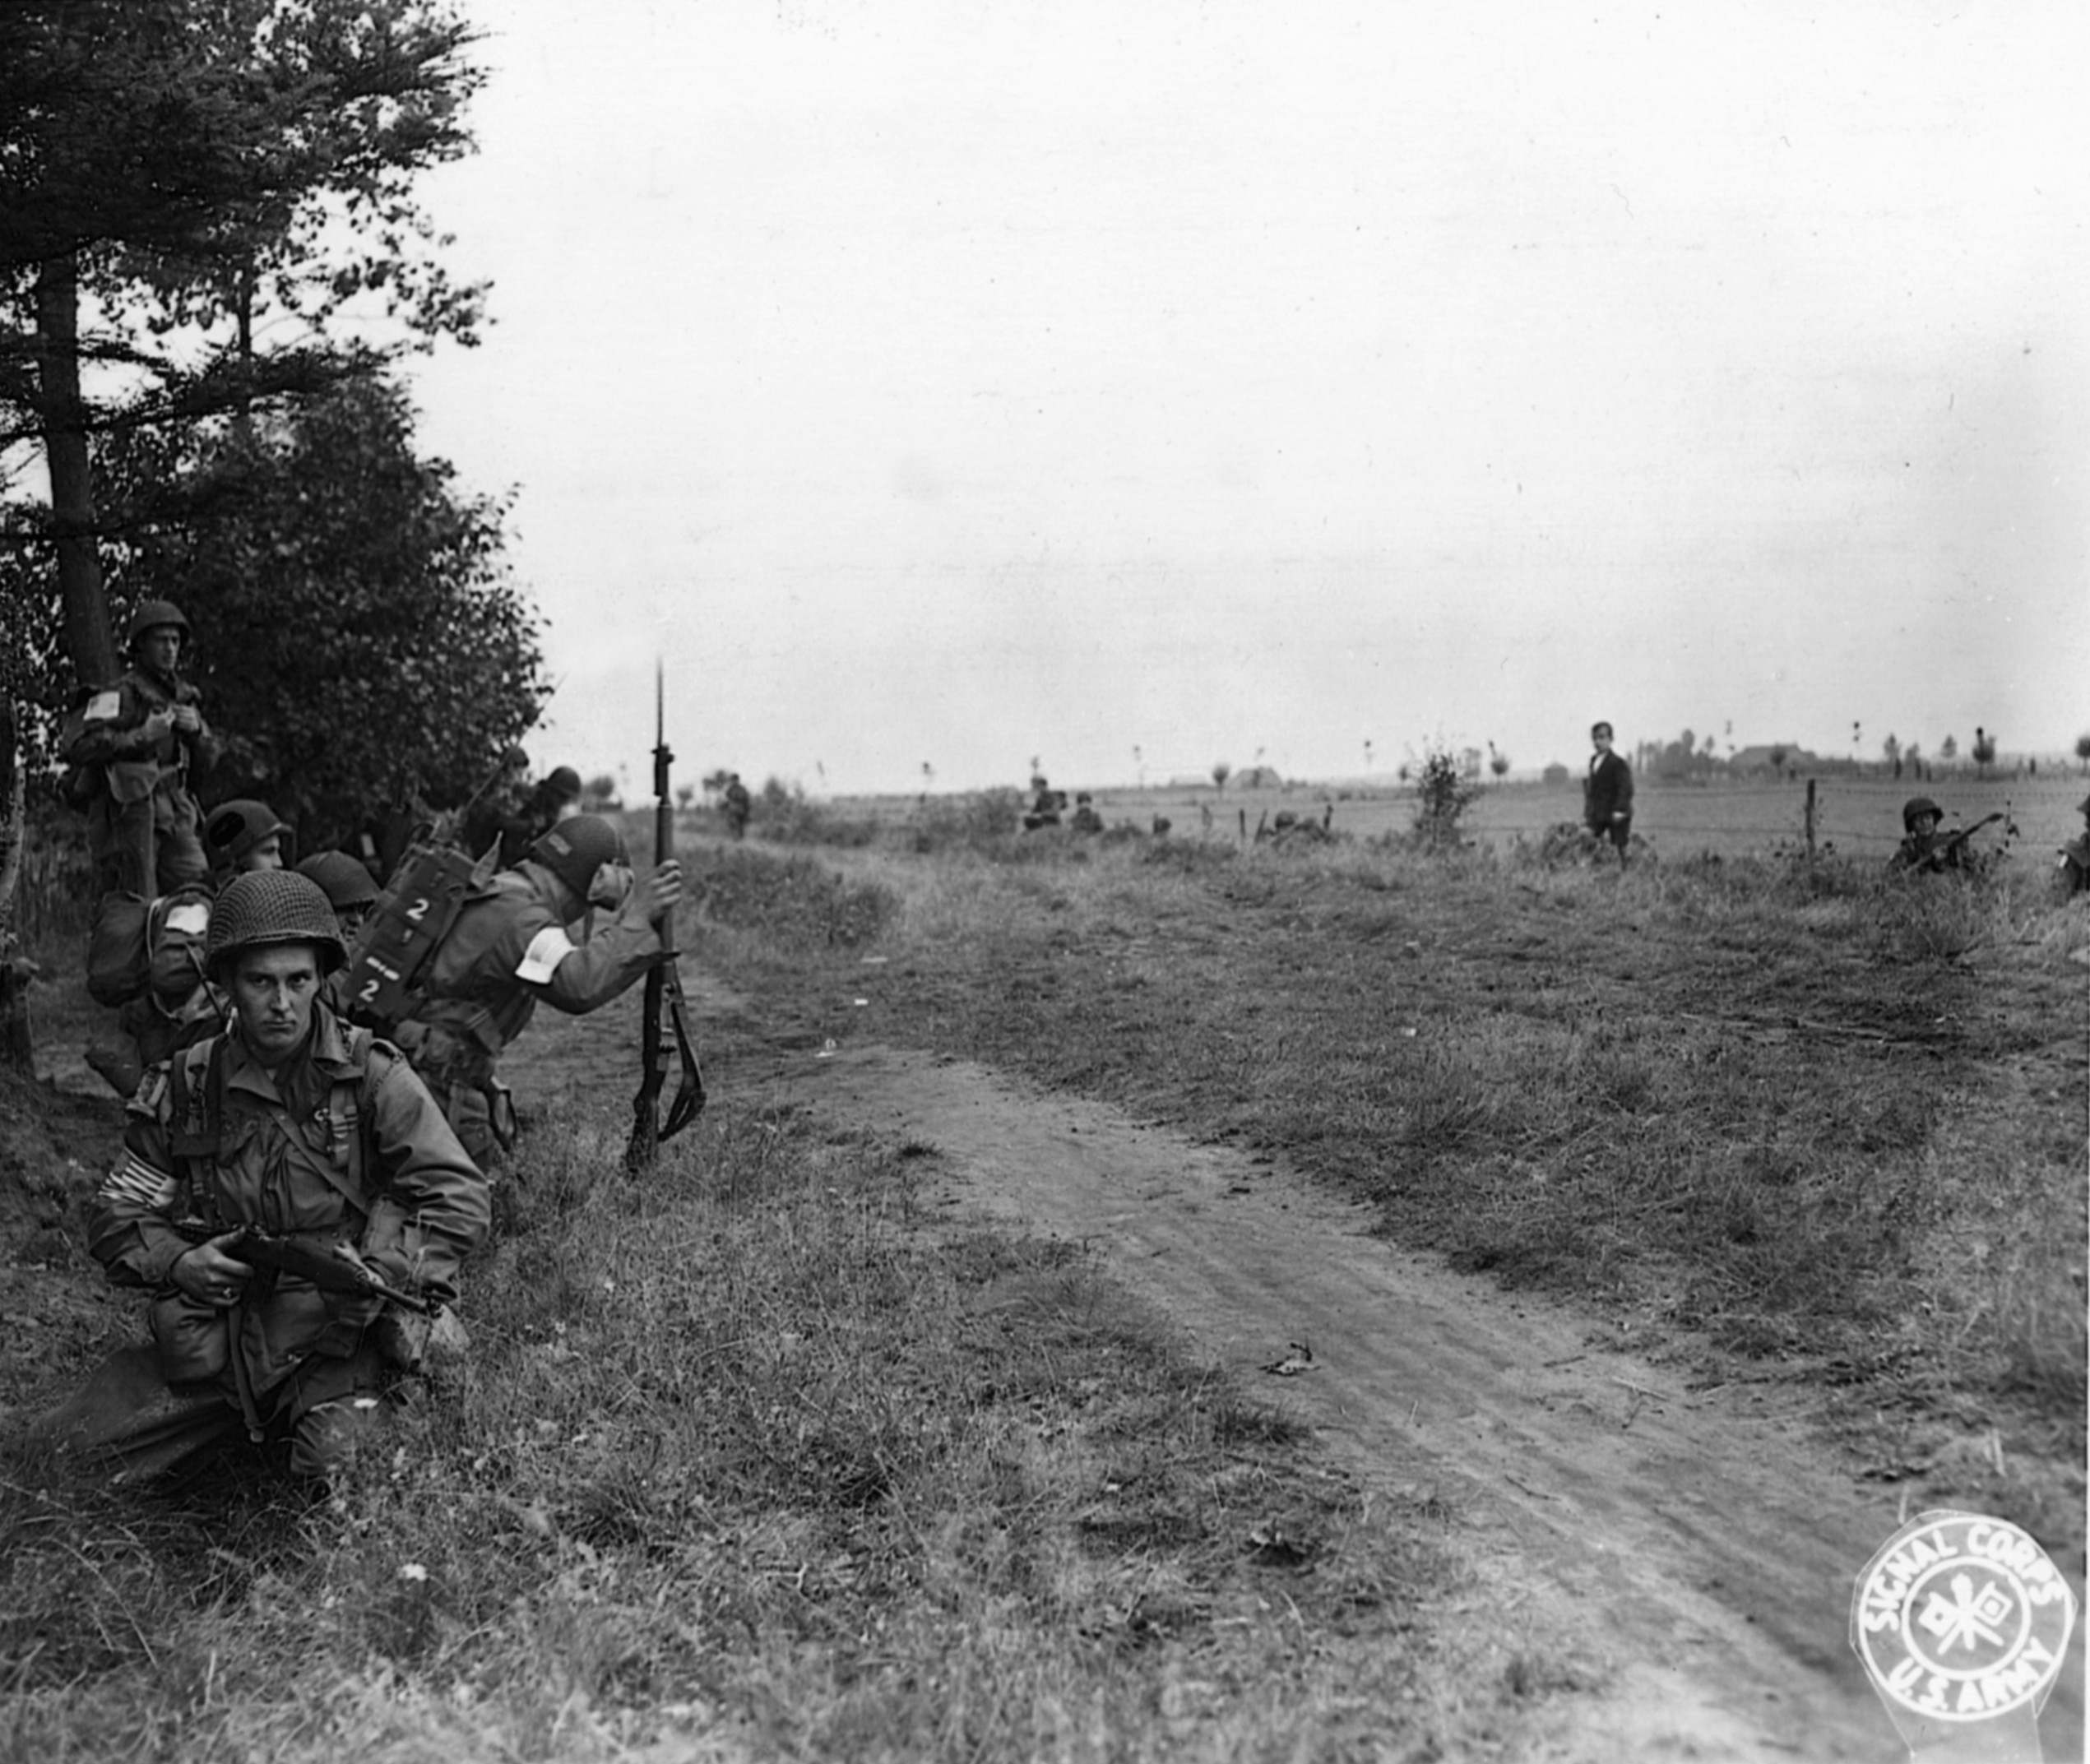 Incoming artillery sends U.S. soldiers scurrying for cover along a roadside in Holland. The 101st Airborne Division jumped into Holland as part of Operation Market Garden in September 1944.